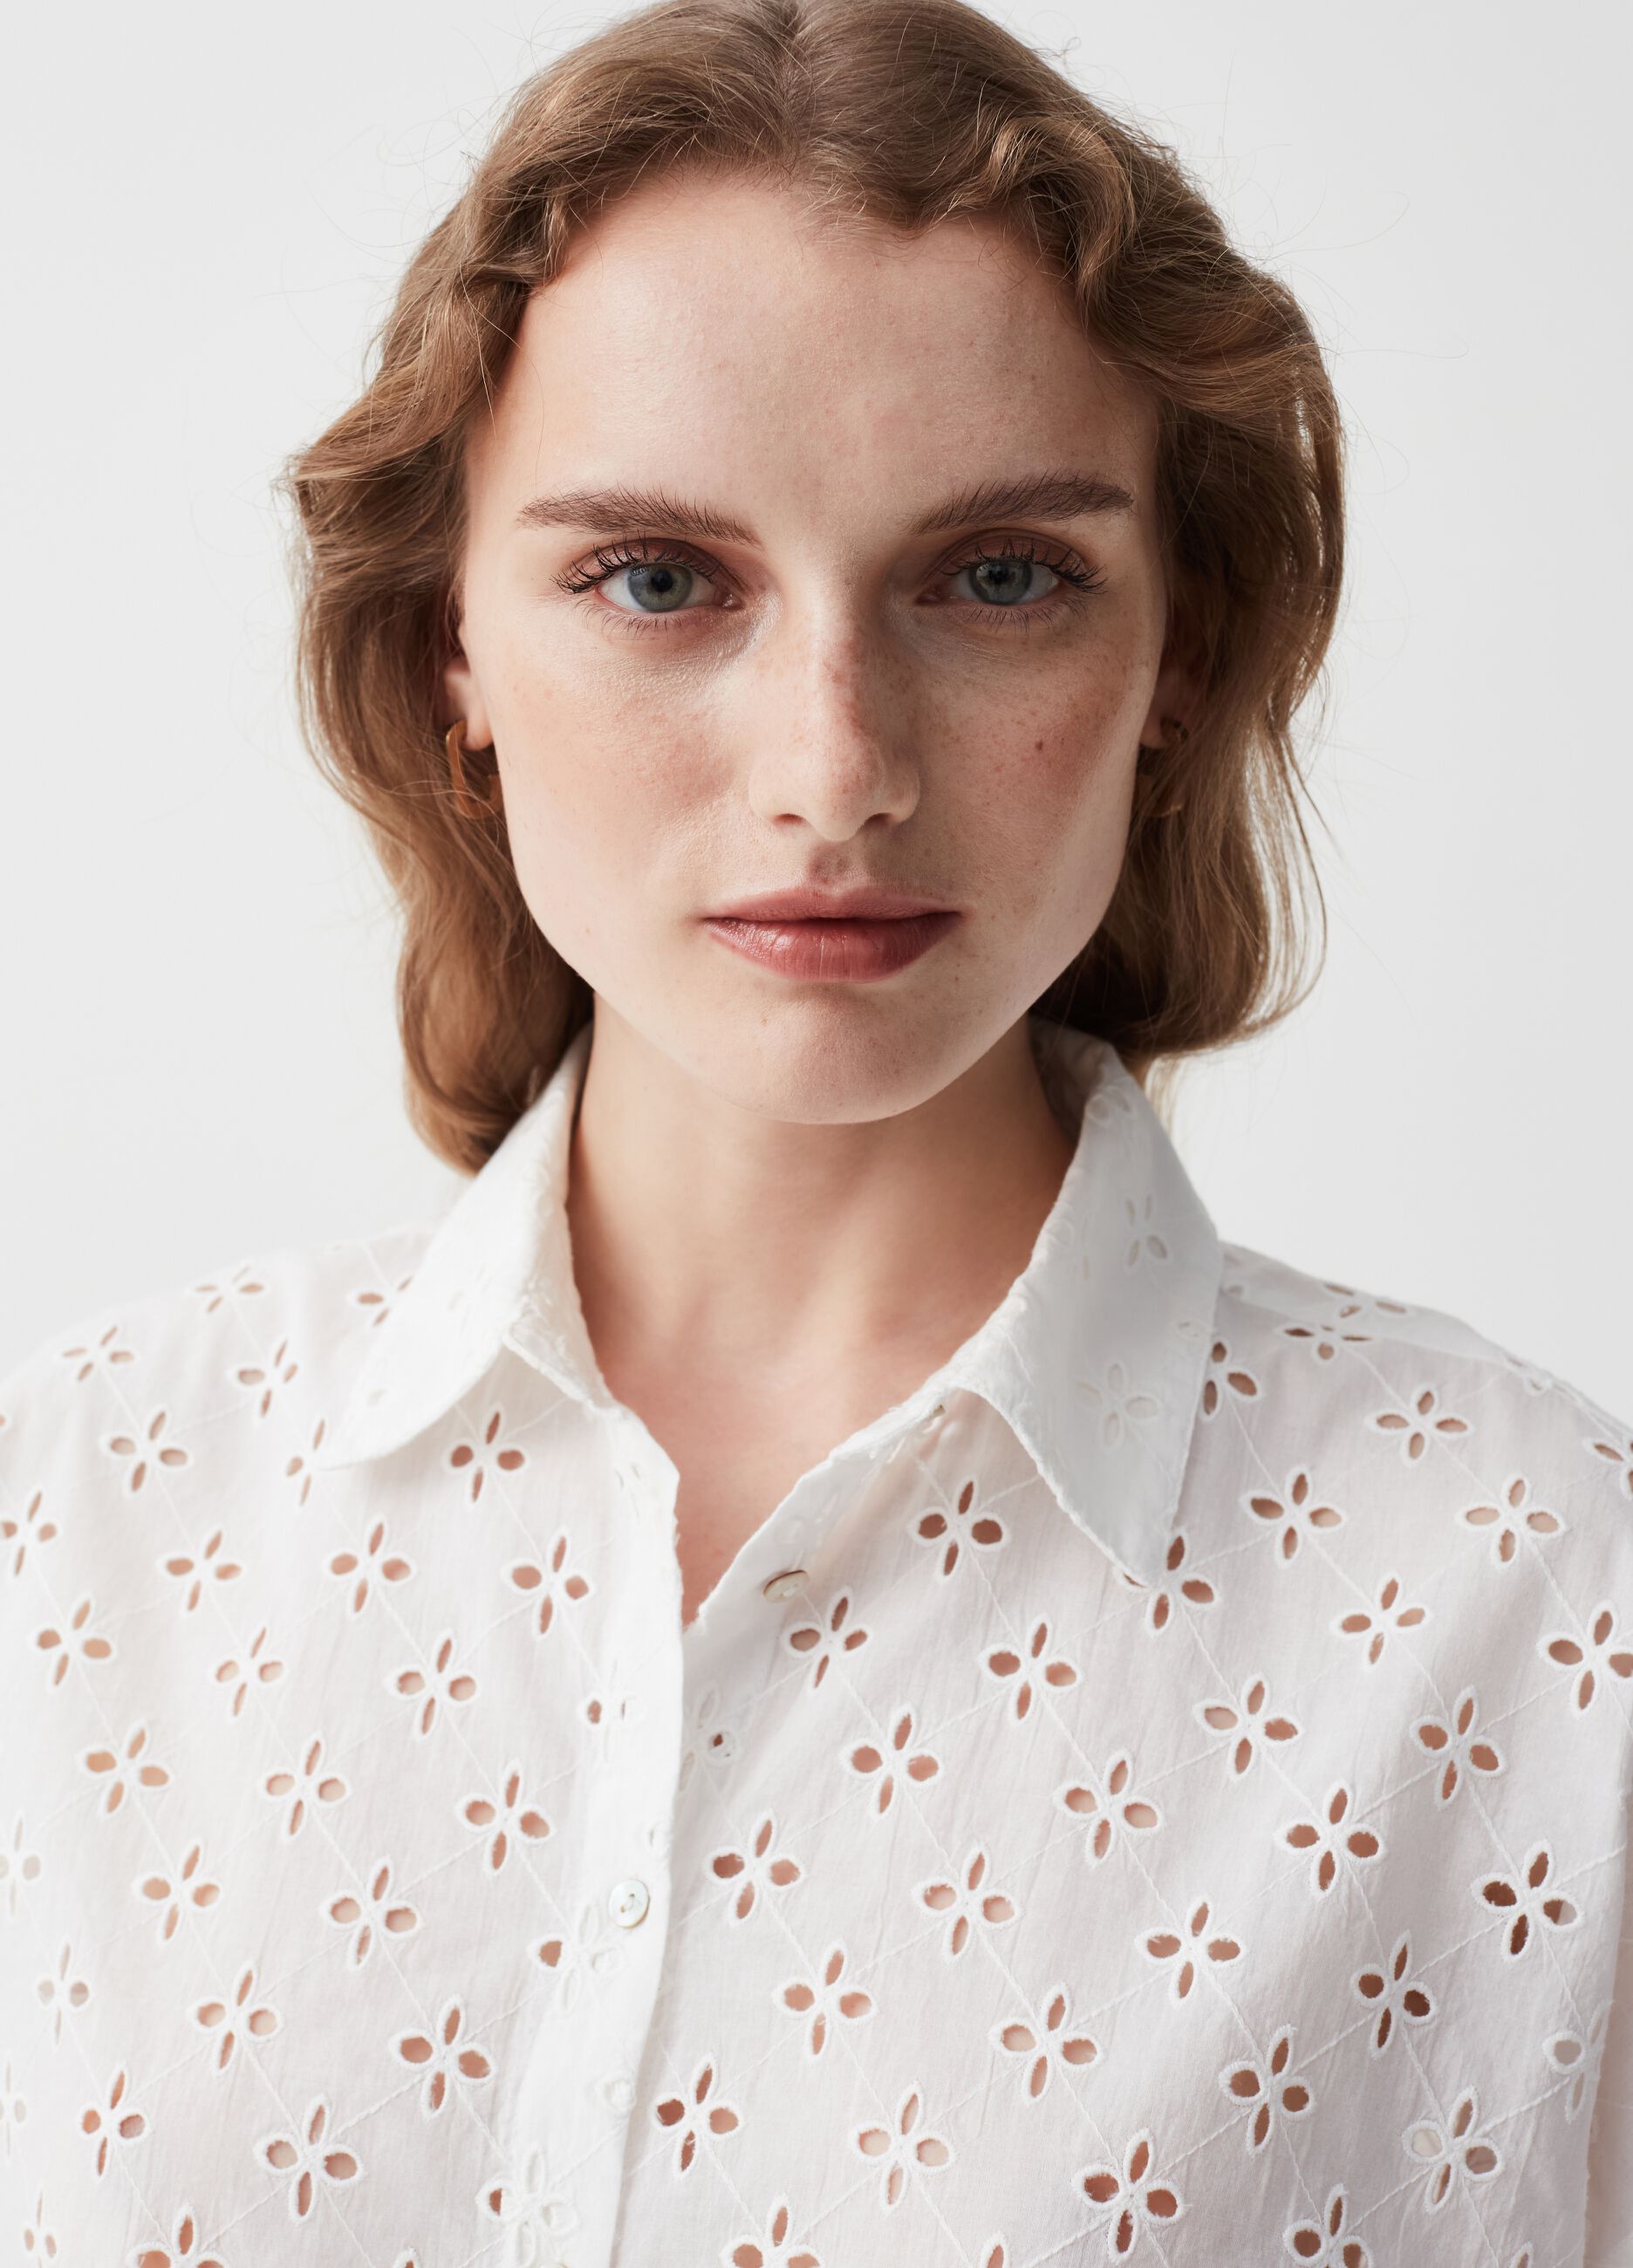 Broderie anglaise shirt with short sleeves